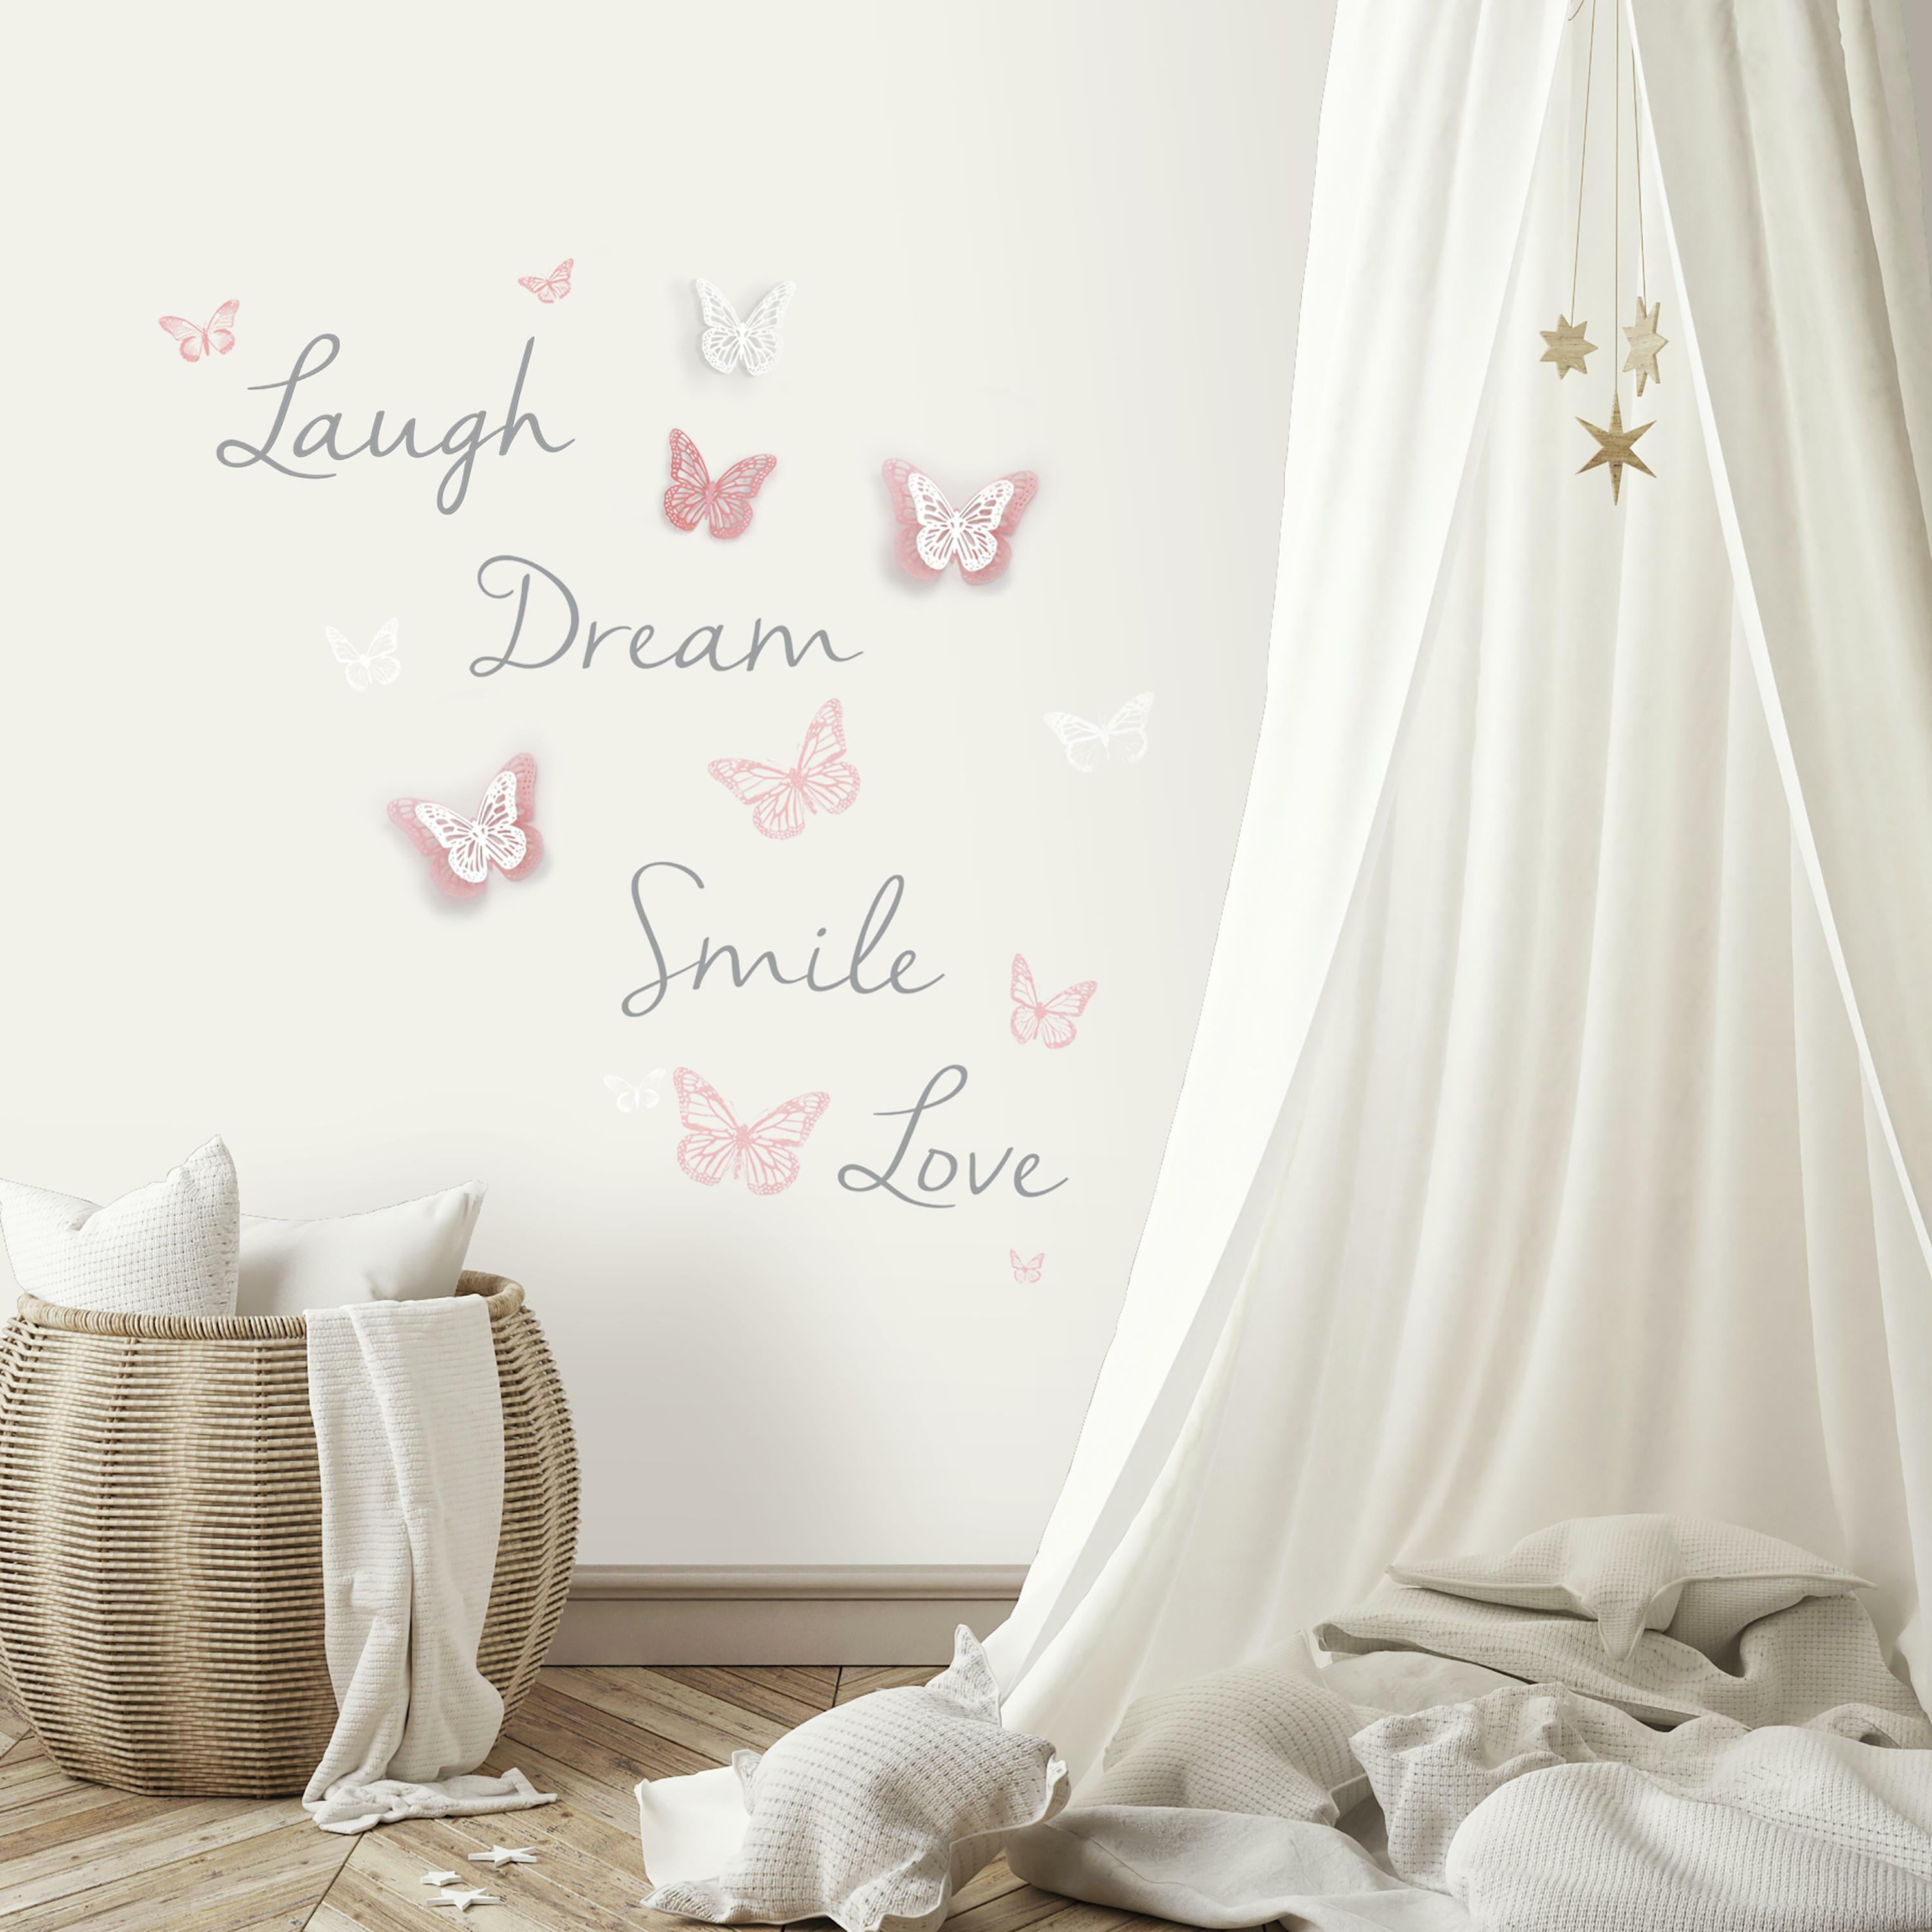 RoomMates RMK3263SCS Lisa Audit Butterfly Quote Peel and Stick Wall Decals 